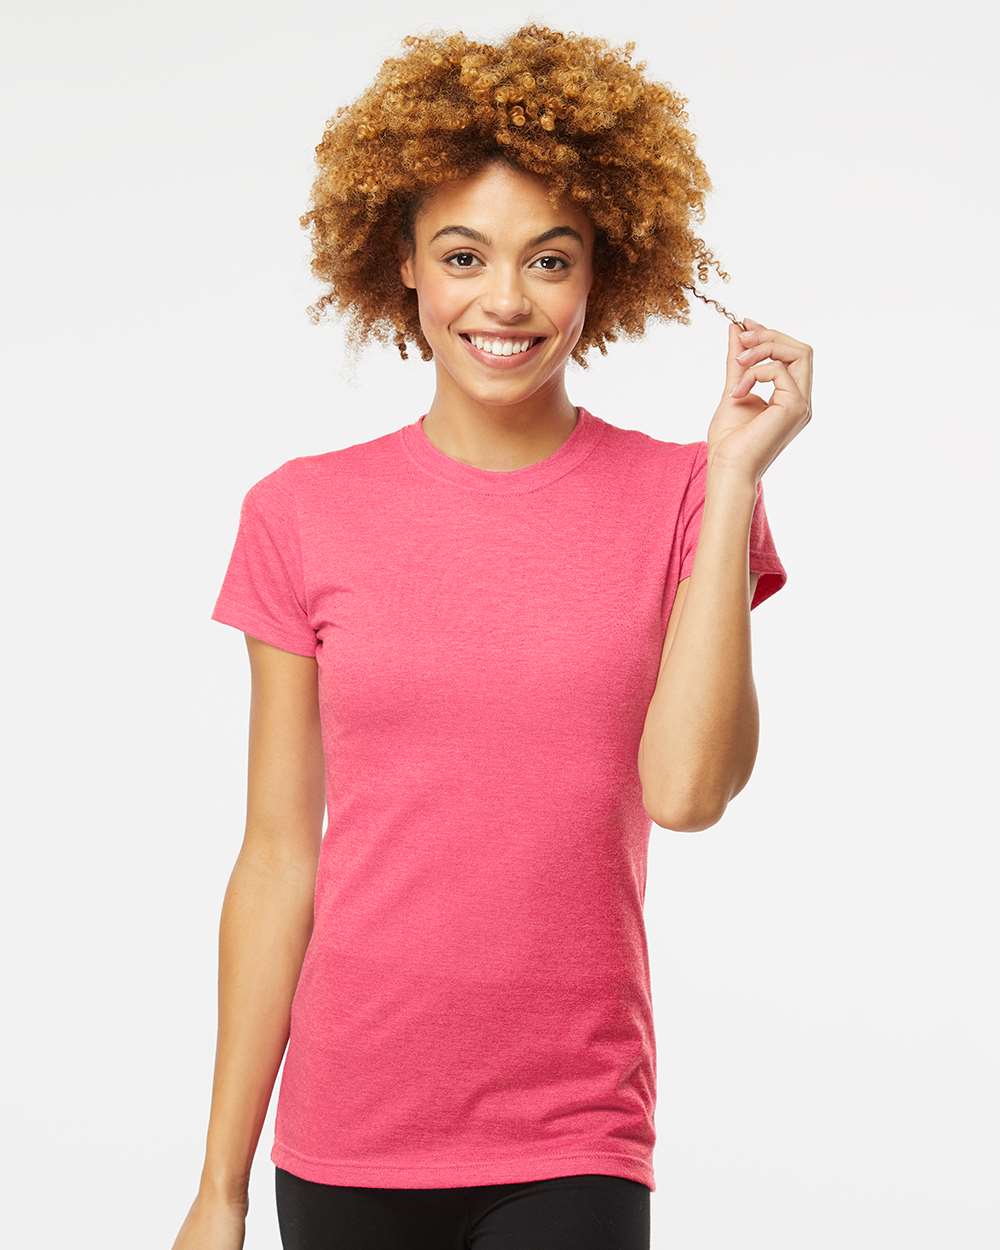 M&O Women’s Deluxe Blend T-Shirt #3540 Heather Pink